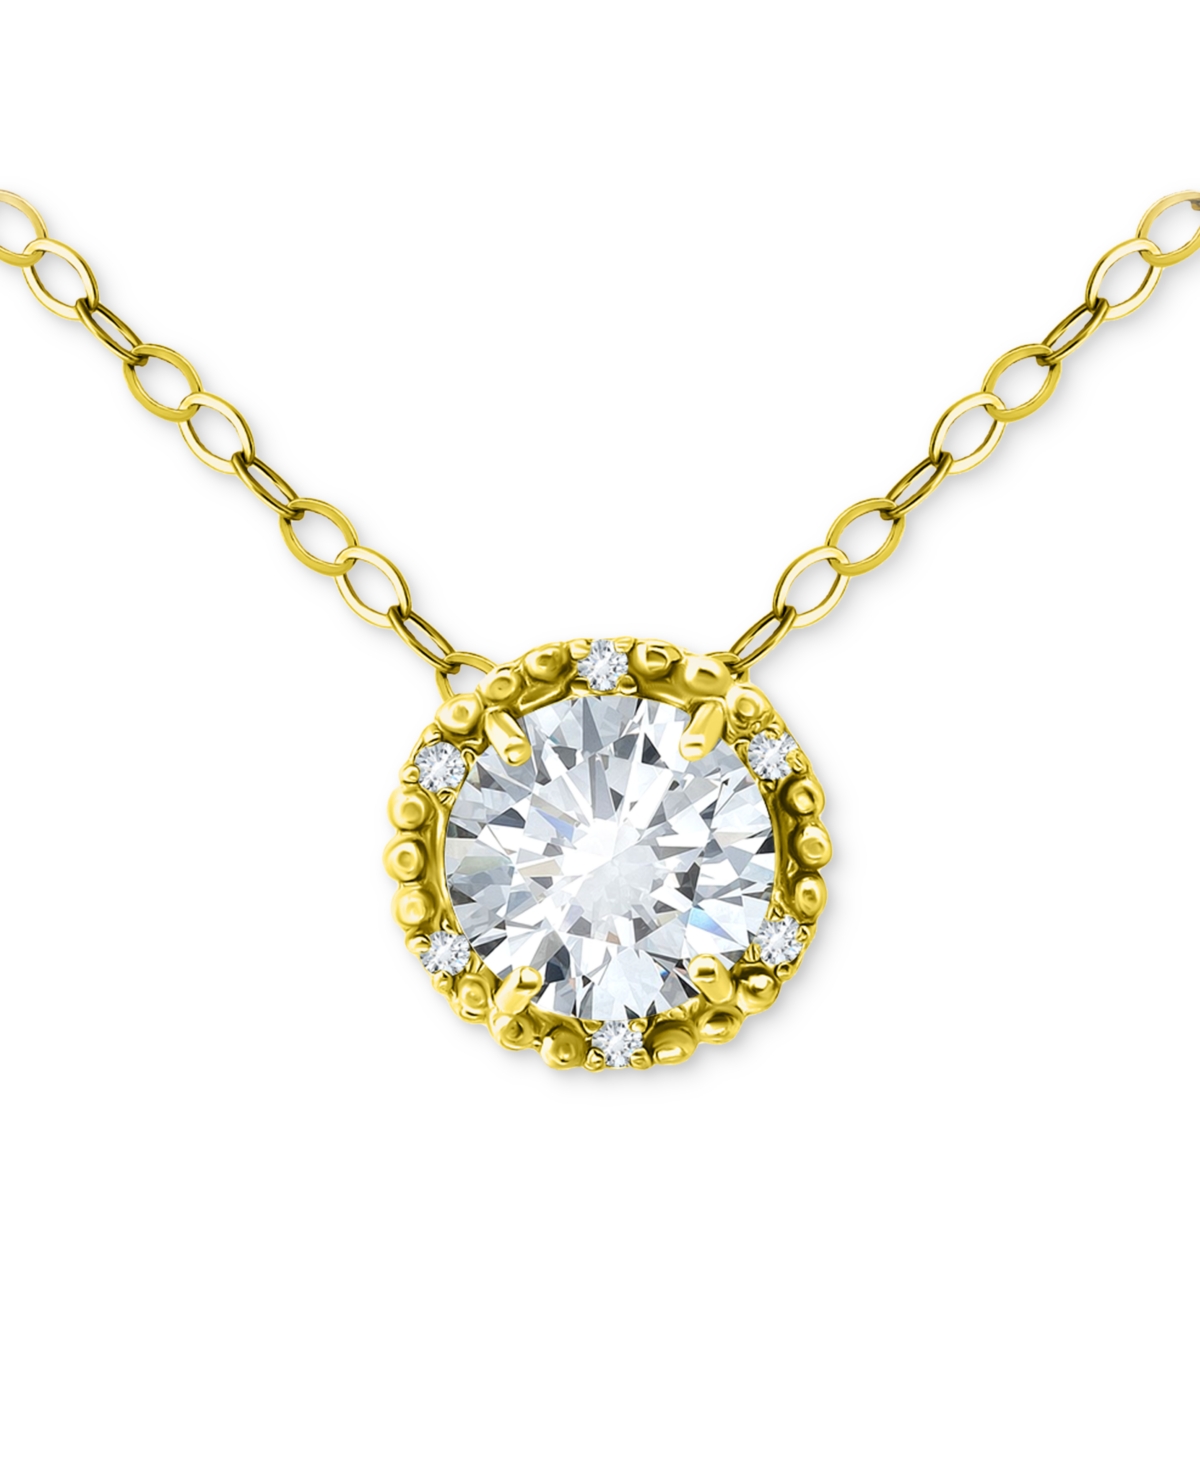 Cubic Zirconia Halo Pendant Necklace in 18k Gold-Plated Sterling Silver, 16" + 2" extender, Created for Macy's - Gold